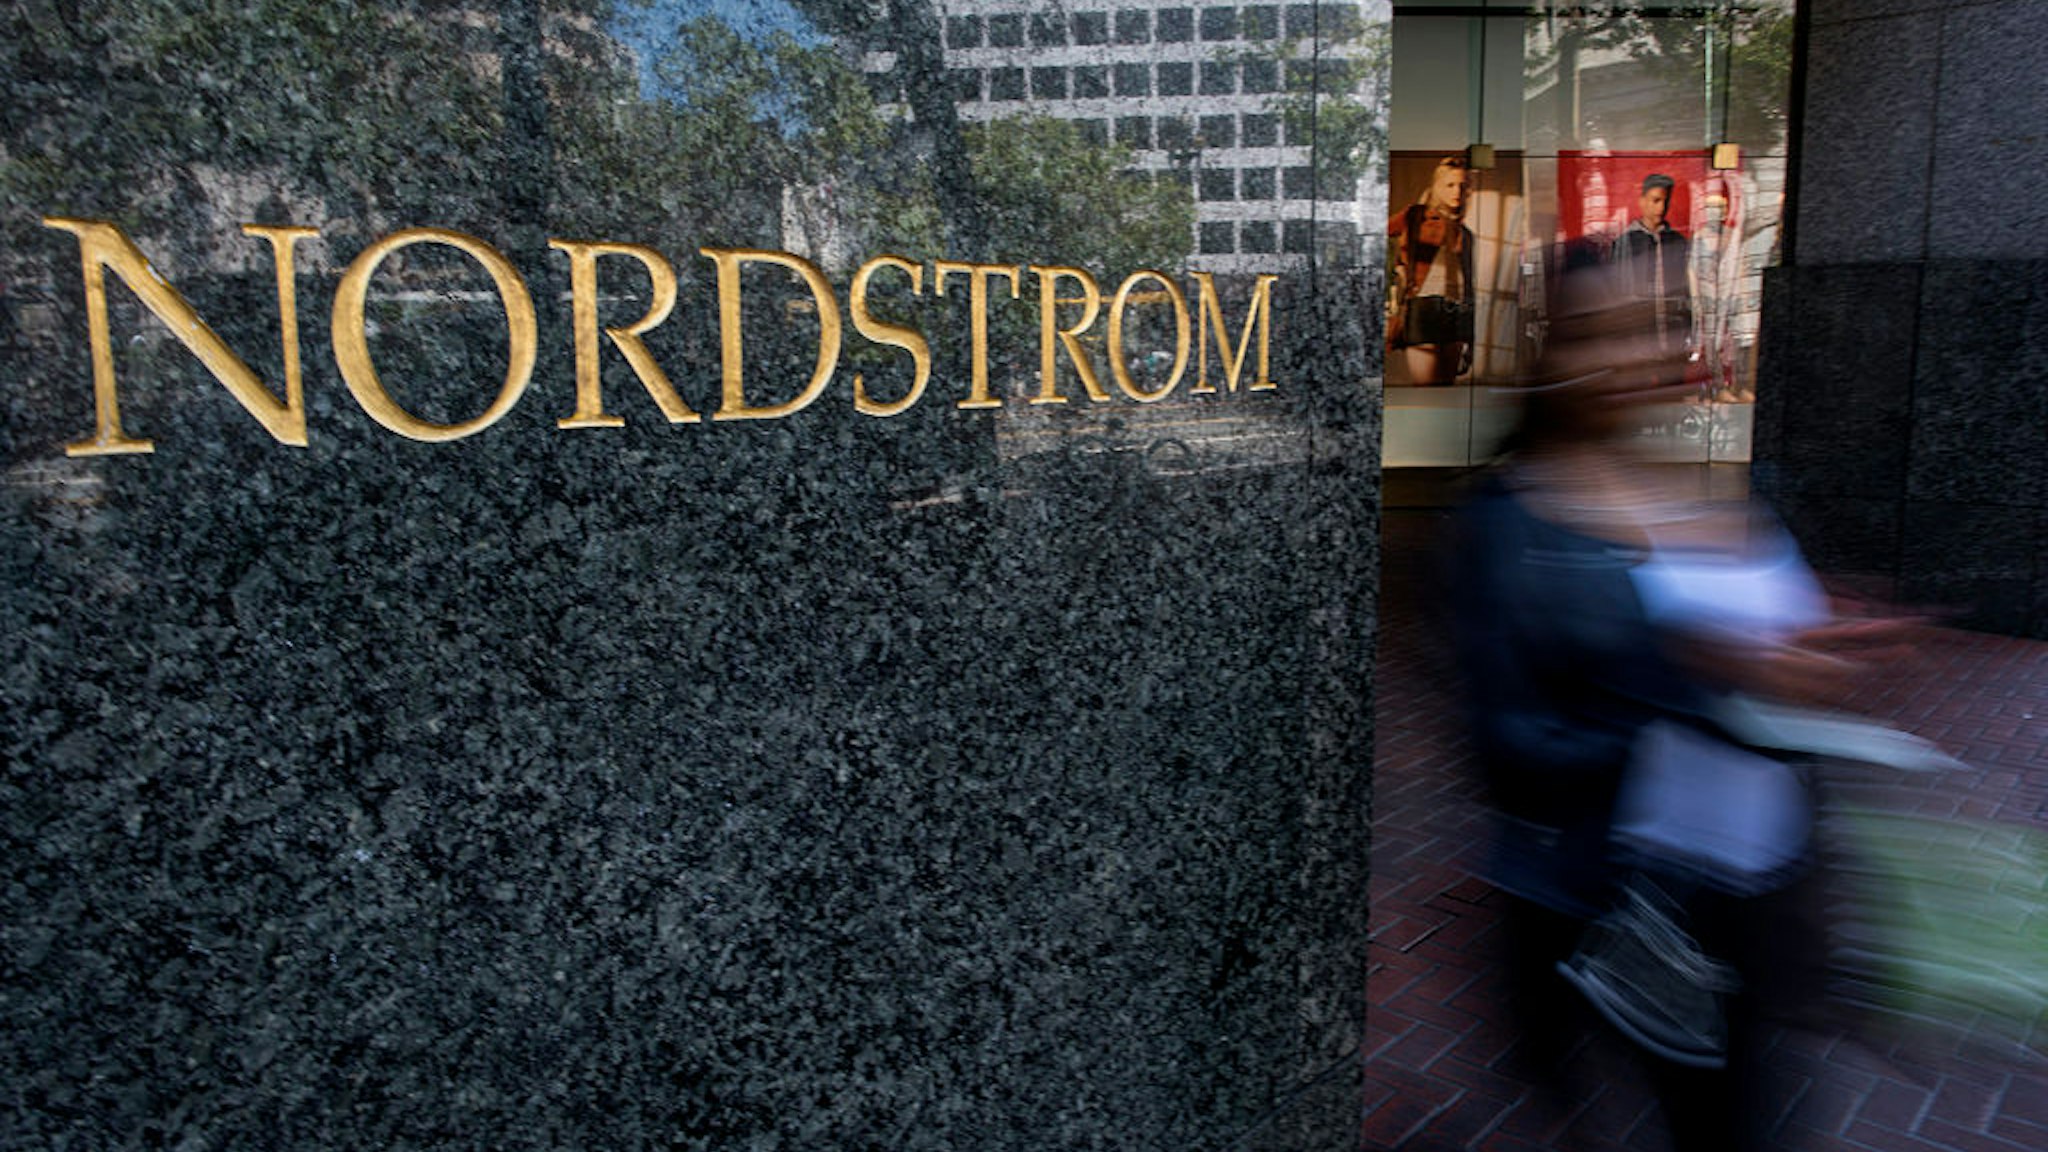 A shopper exits a Nordstrom Inc. store at the Westfield San Francisco Shopping Centre in San Francisco, California, U.S., on Tuesday, May 12, 2015.